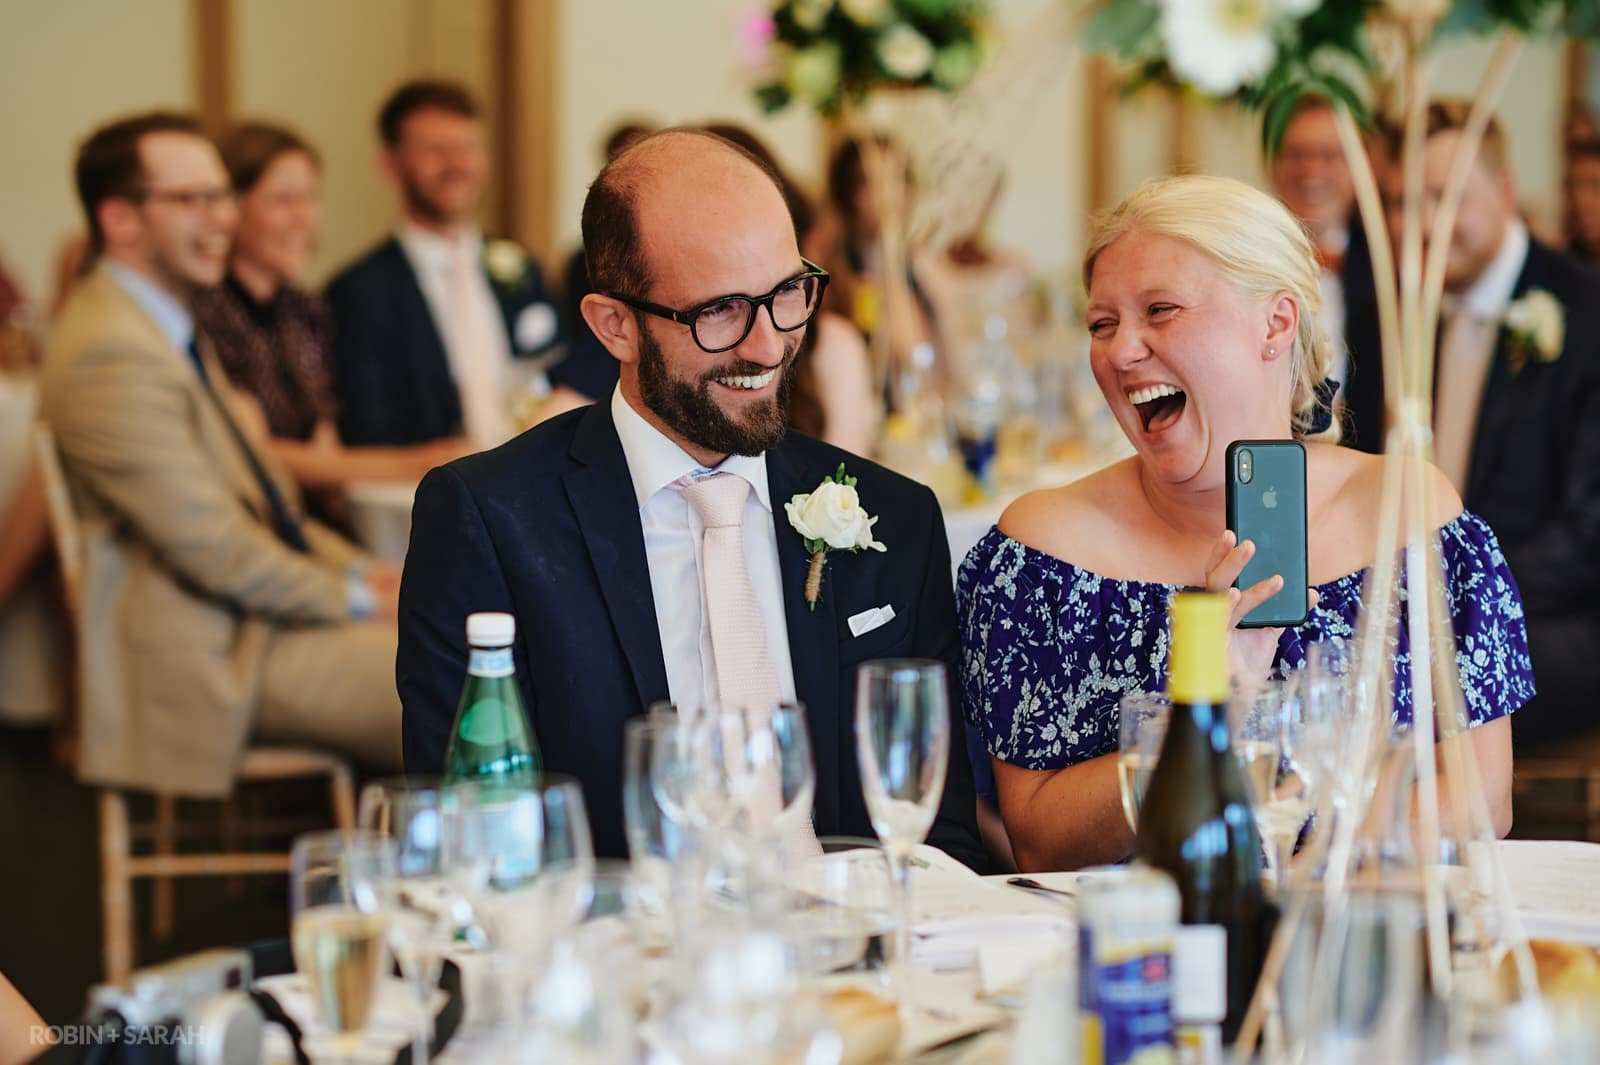 Wedding guests laughing during speeches